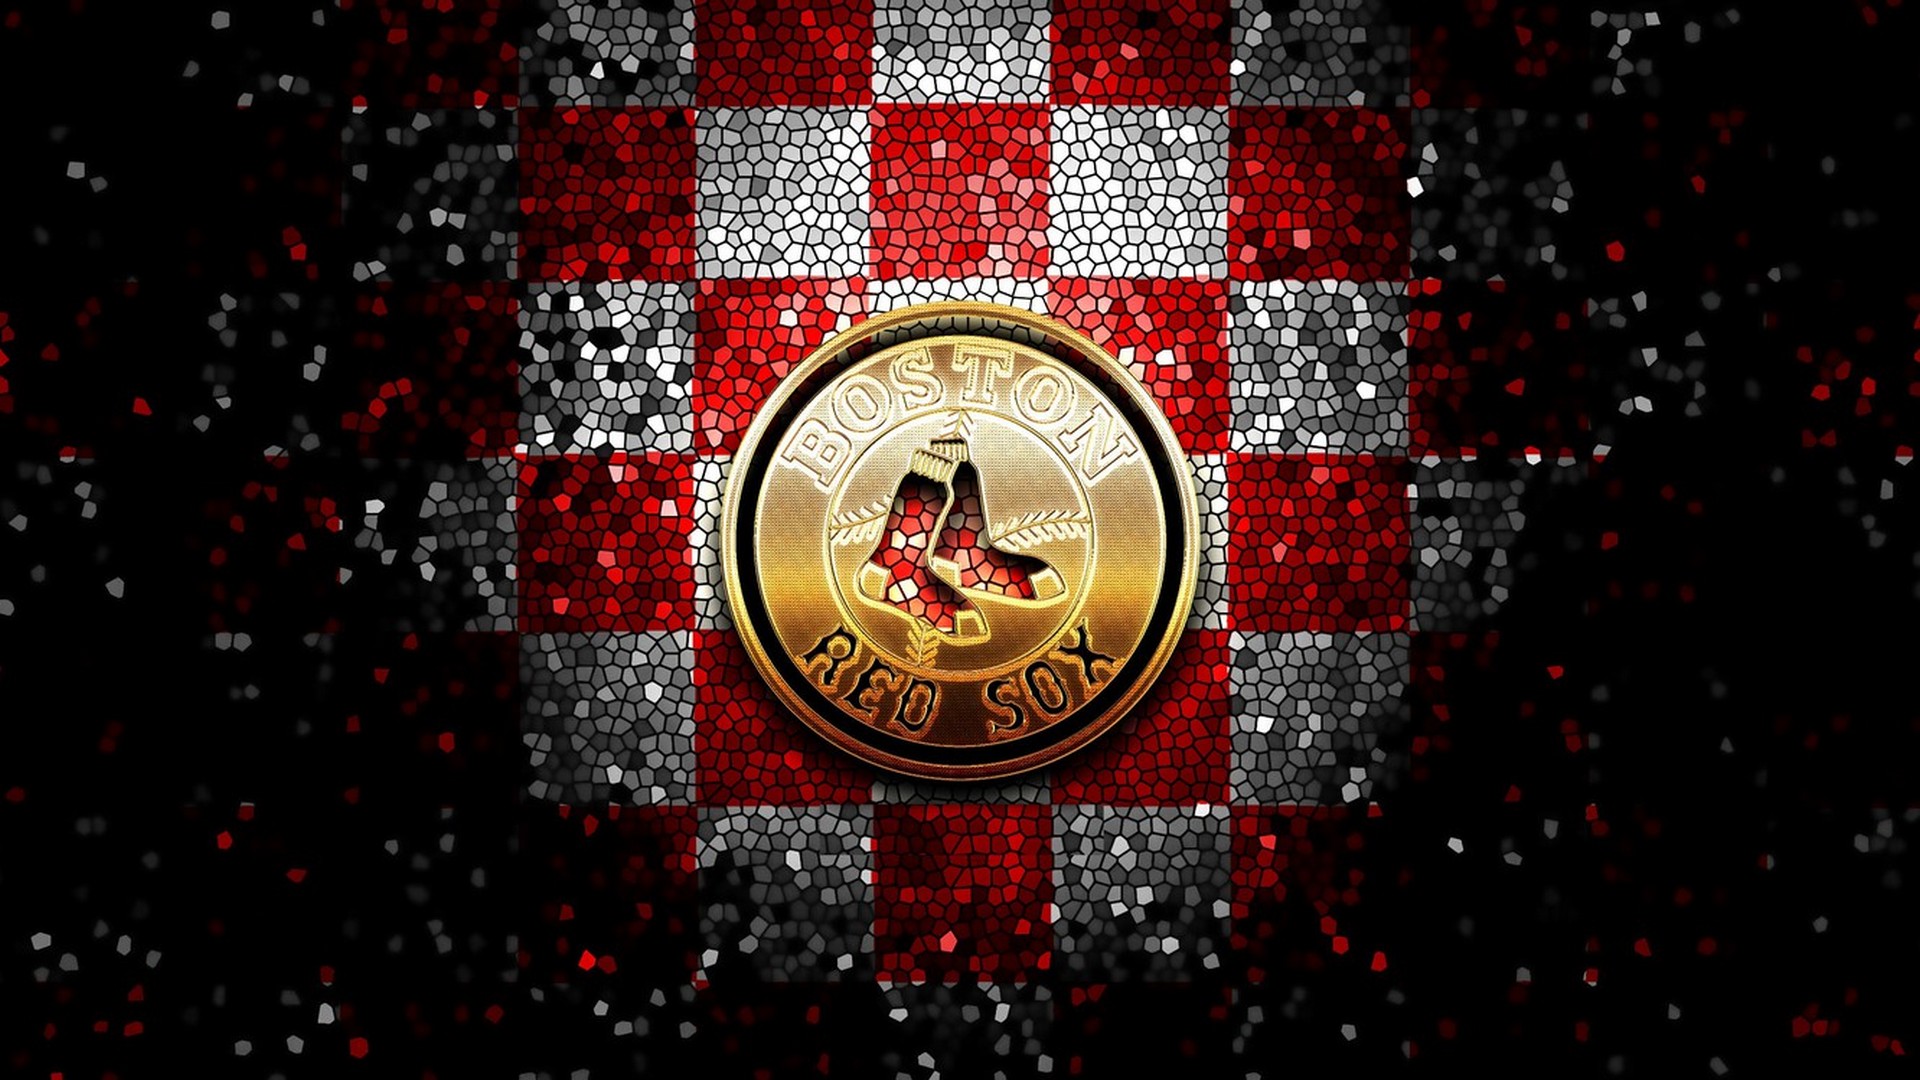 HD Backgrounds Boston Red Sox With high-resolution 1920X1080 pixel. You can use this wallpaper for Mac Desktop Wallpaper, Laptop Screensavers, Android Wallpapers, Tablet or iPhone Home Screen and another mobile phone device